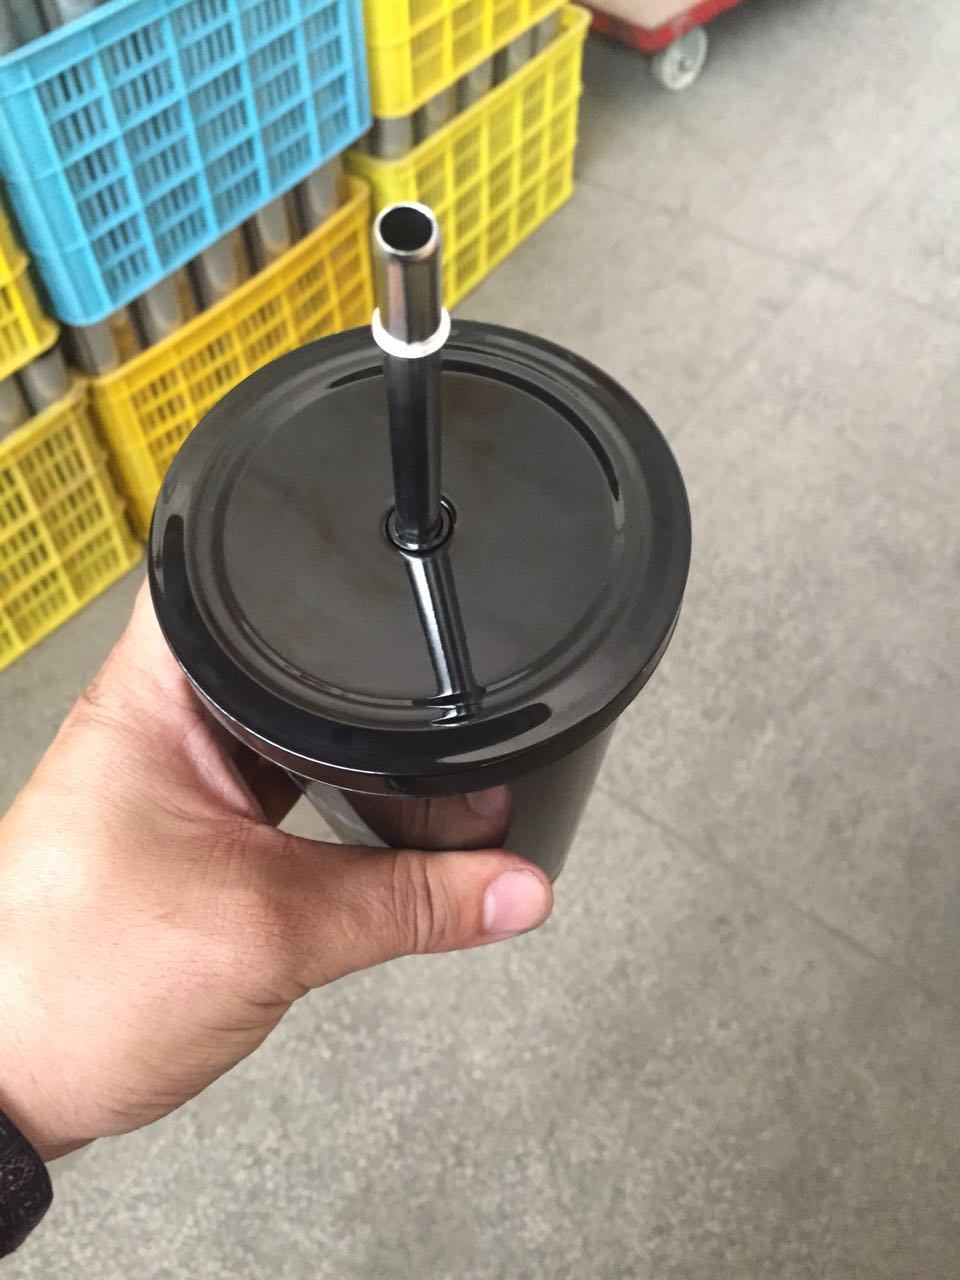 10 12 14 16 18 20 9 25oz 350 450 500ml Wholesale Hot Sale Stainless Steel Straw Cup Double Layer Thermos Cup Coffee Cup Gift Customized Logo Advertising Cup Mug